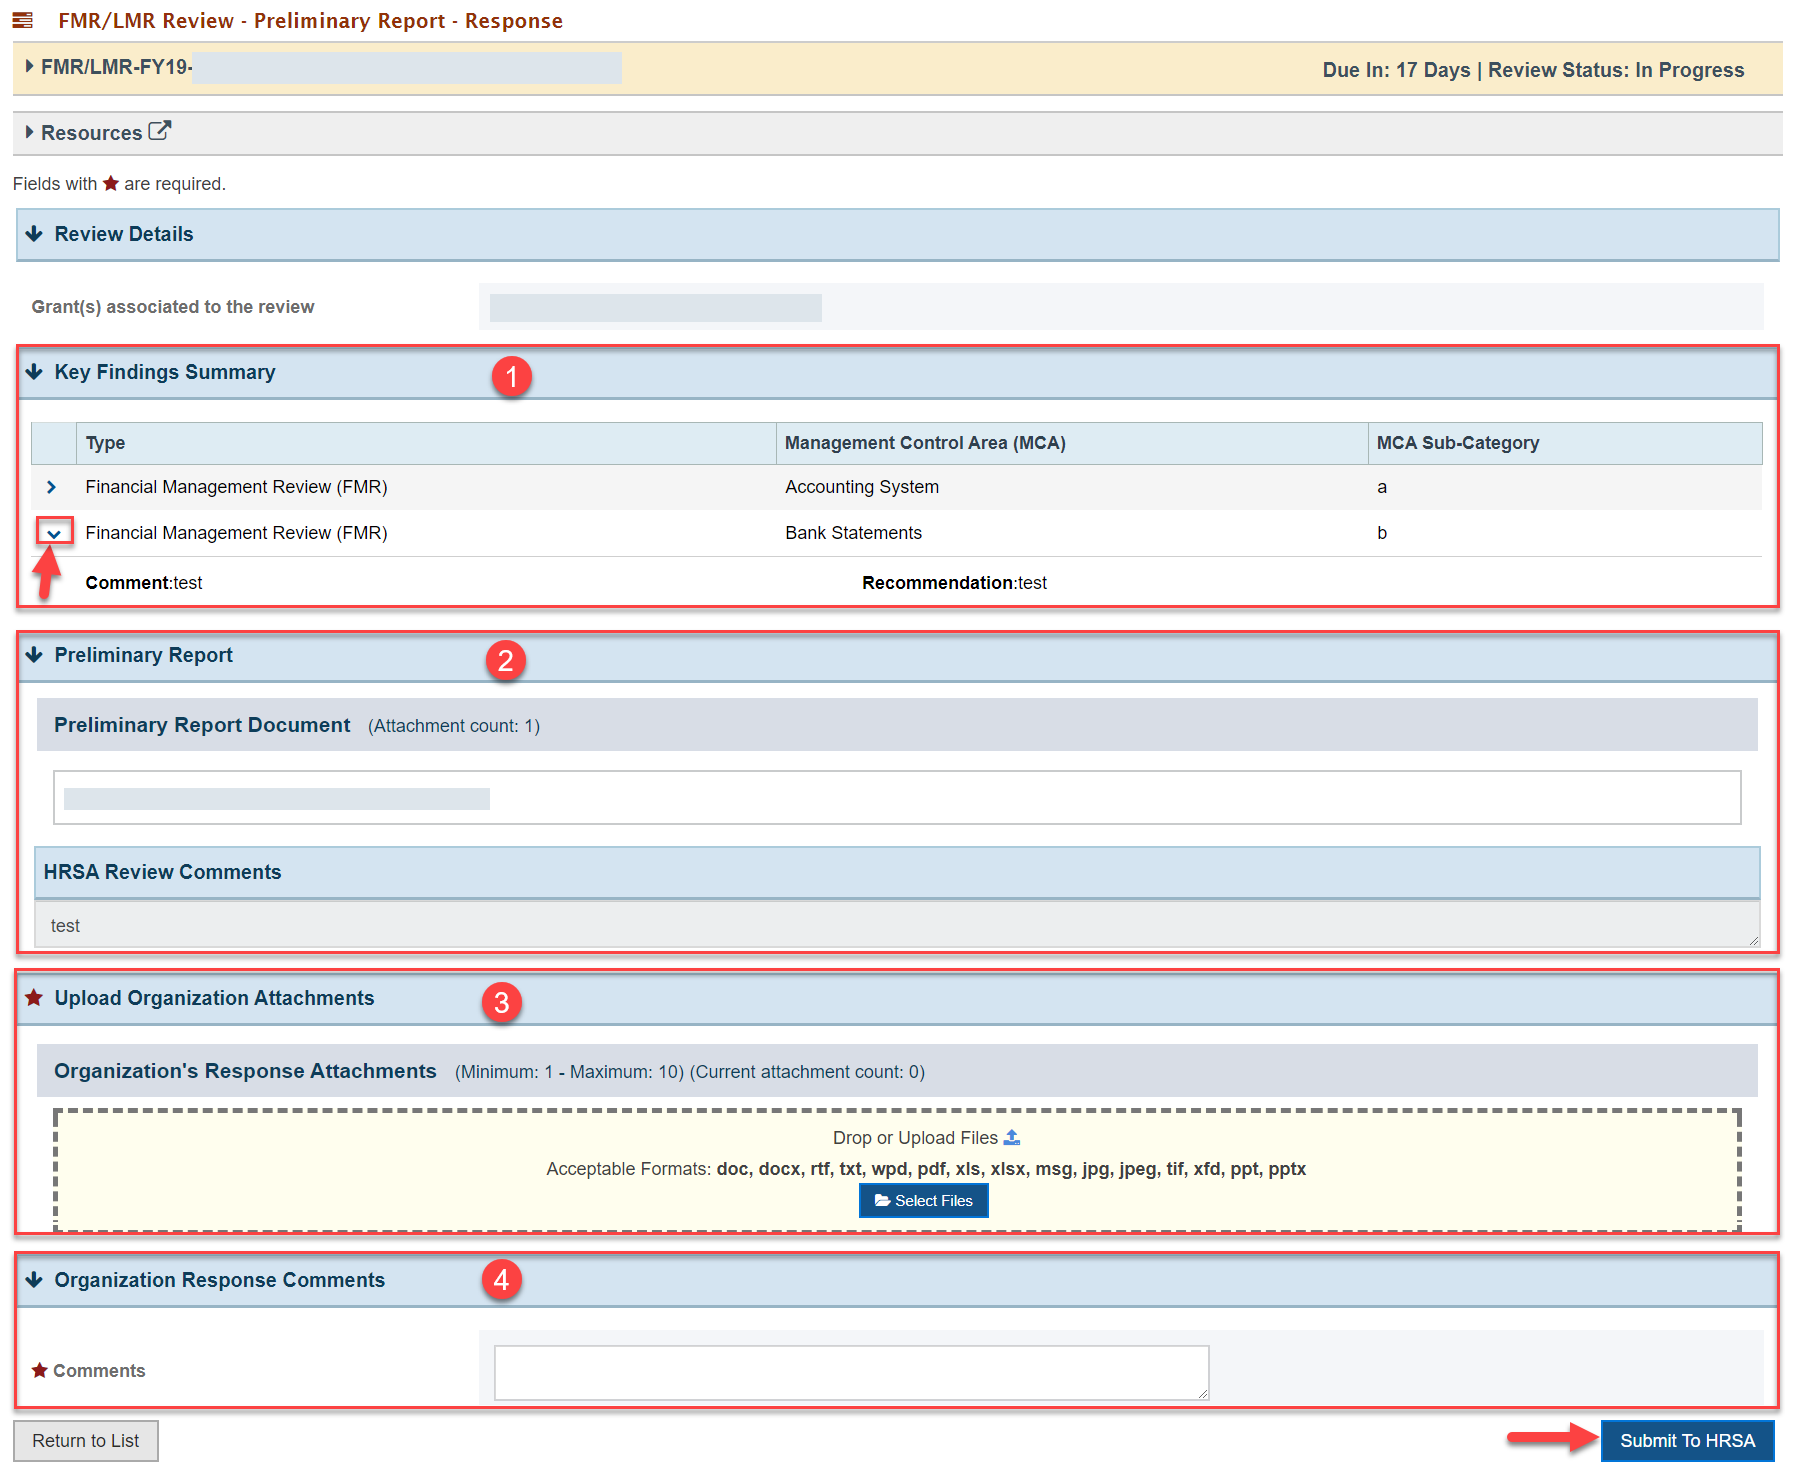 Screenshot of the Preliminary Report Response page